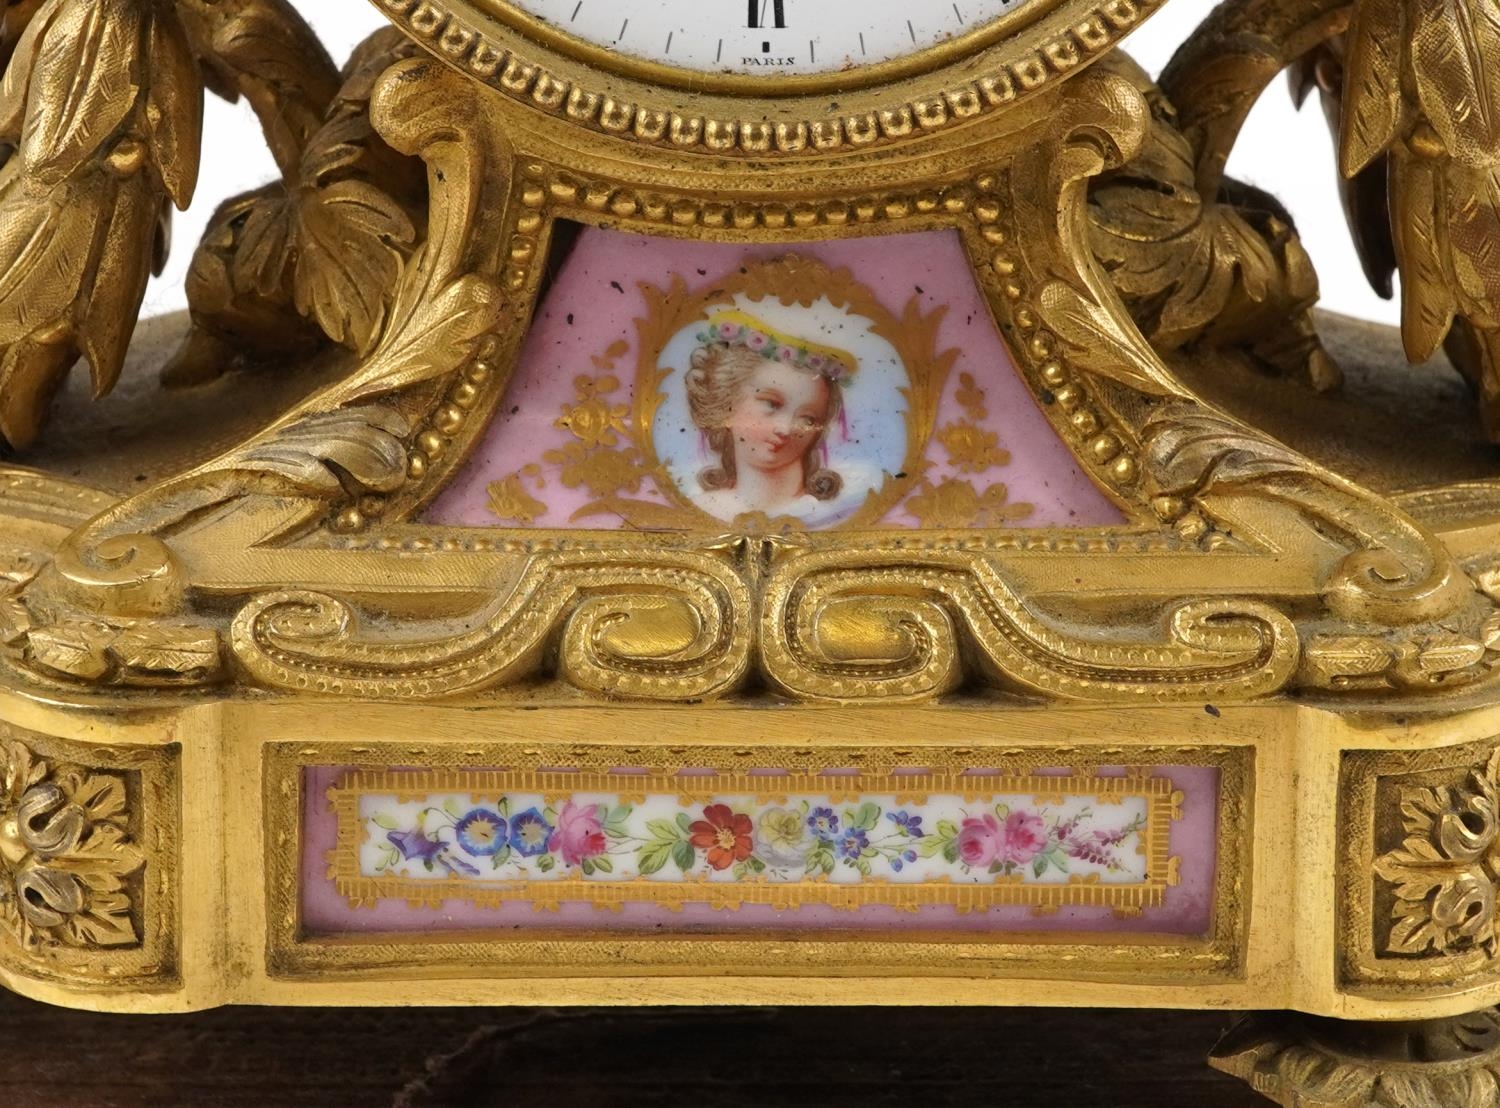 Drocourt of Paris, 19th century French ormolu mantle clock striking on a bell,cast with torches - Image 2 of 5